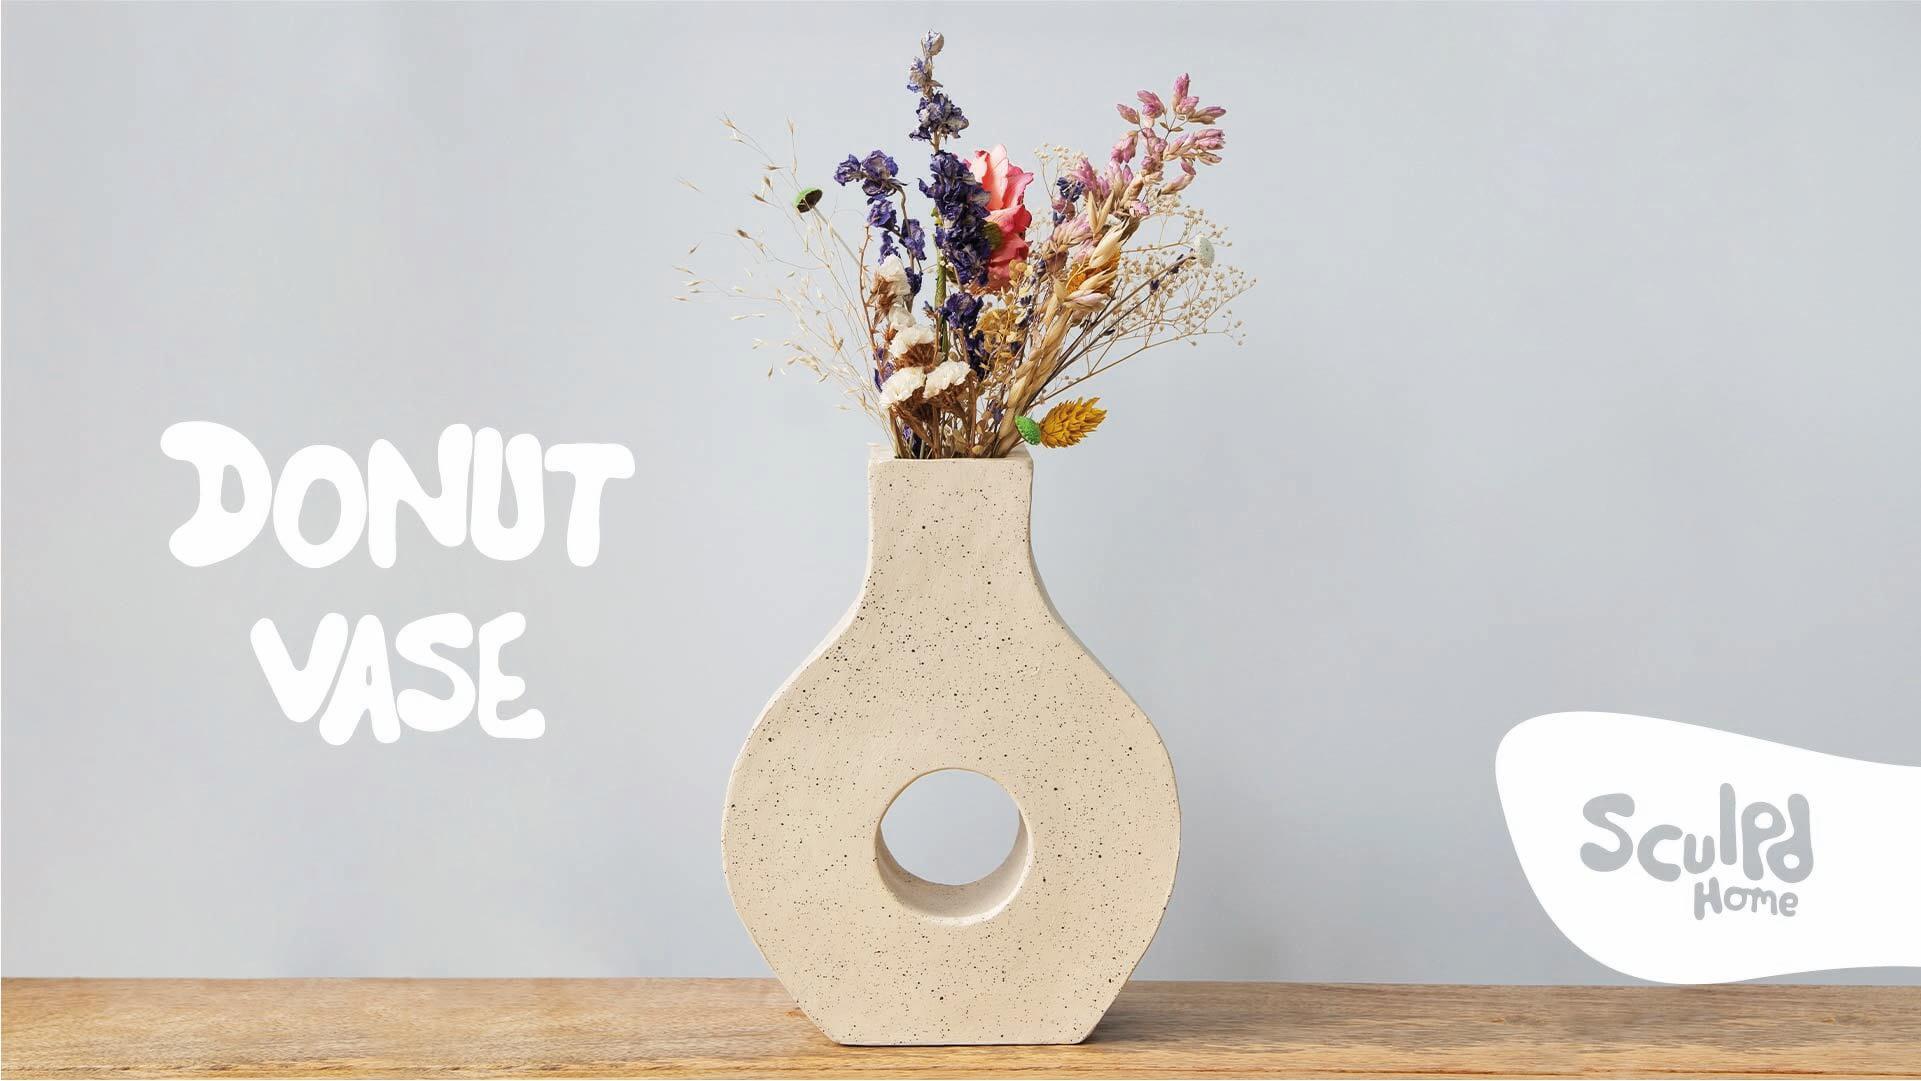 Make Your Own Donut Vase | By Sculpd Home